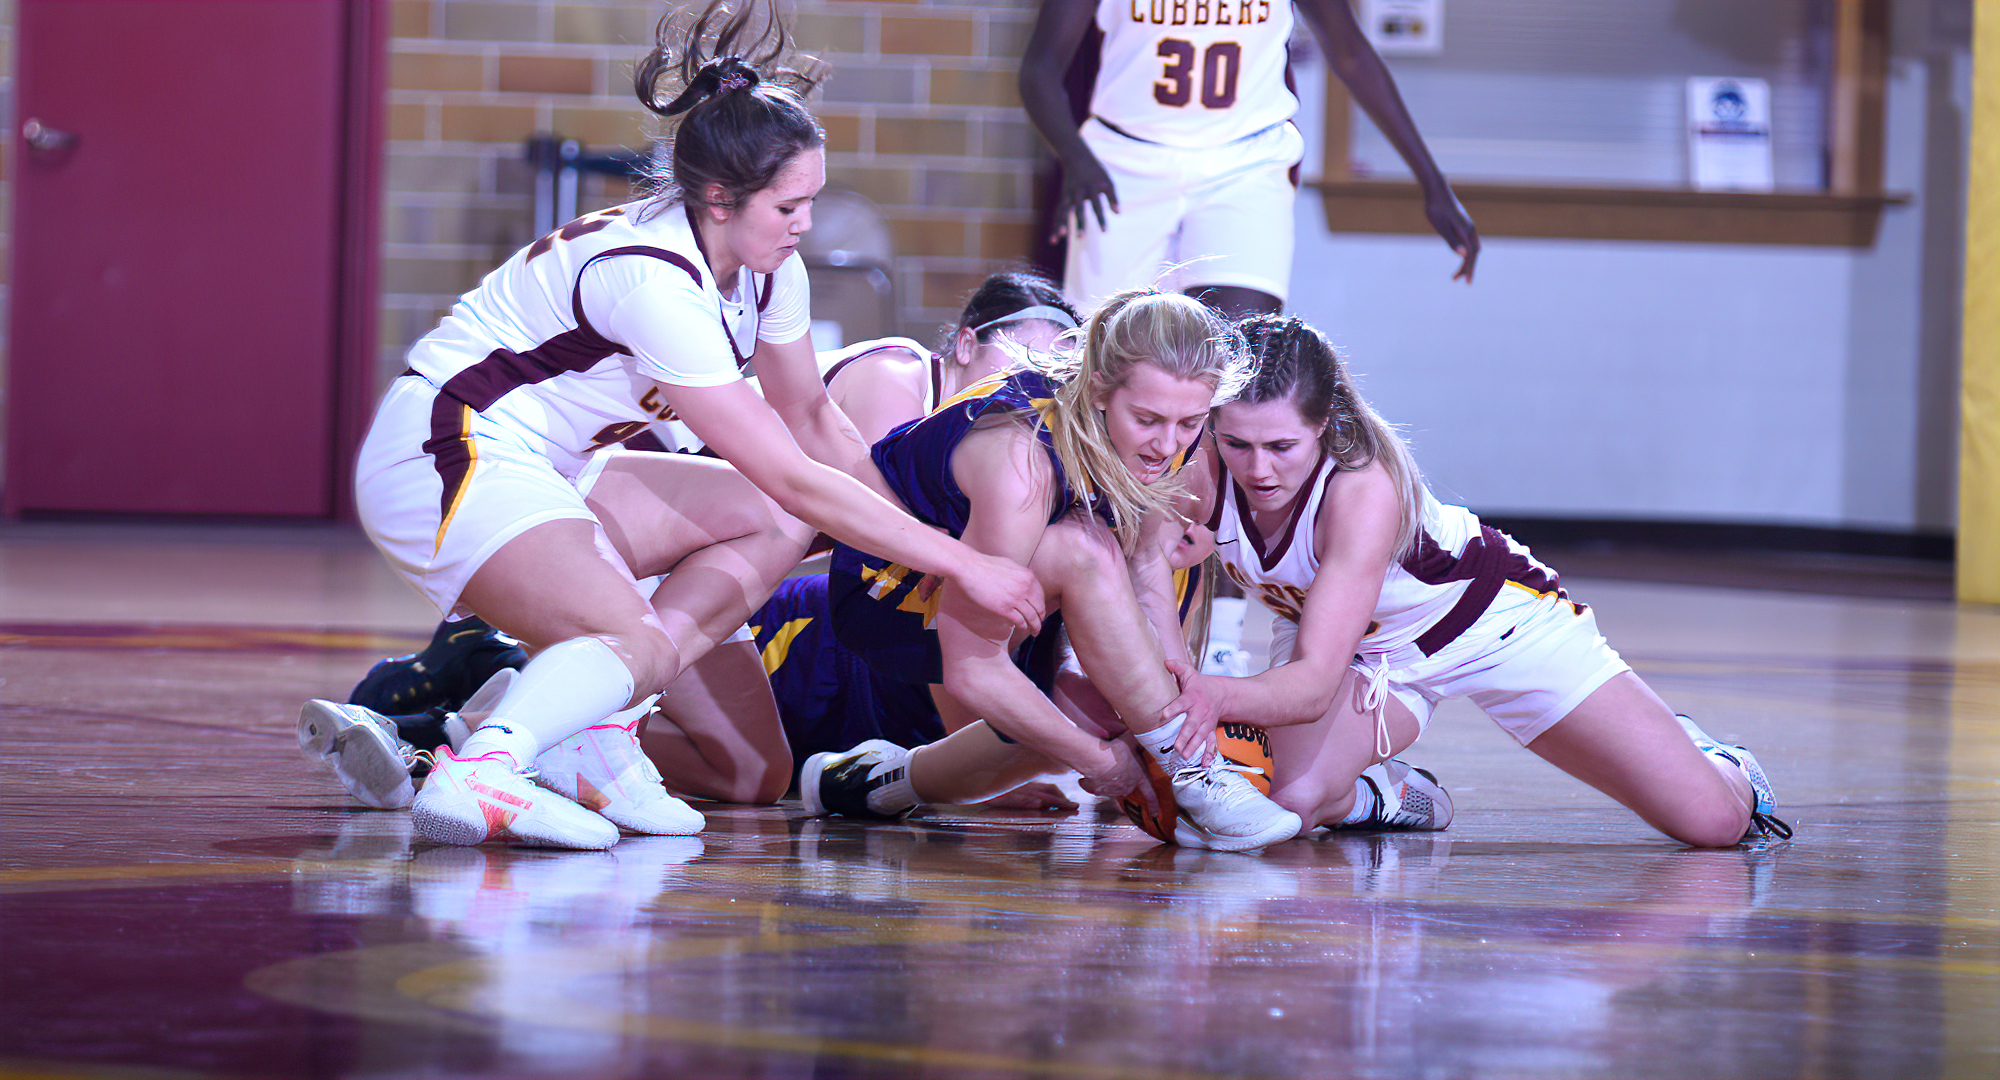 Makayla Anderson (L) and Emily Beseman (Far Right) lead a group of Cobbers fighting for a loose ball during their playoff game with St. Catherine.